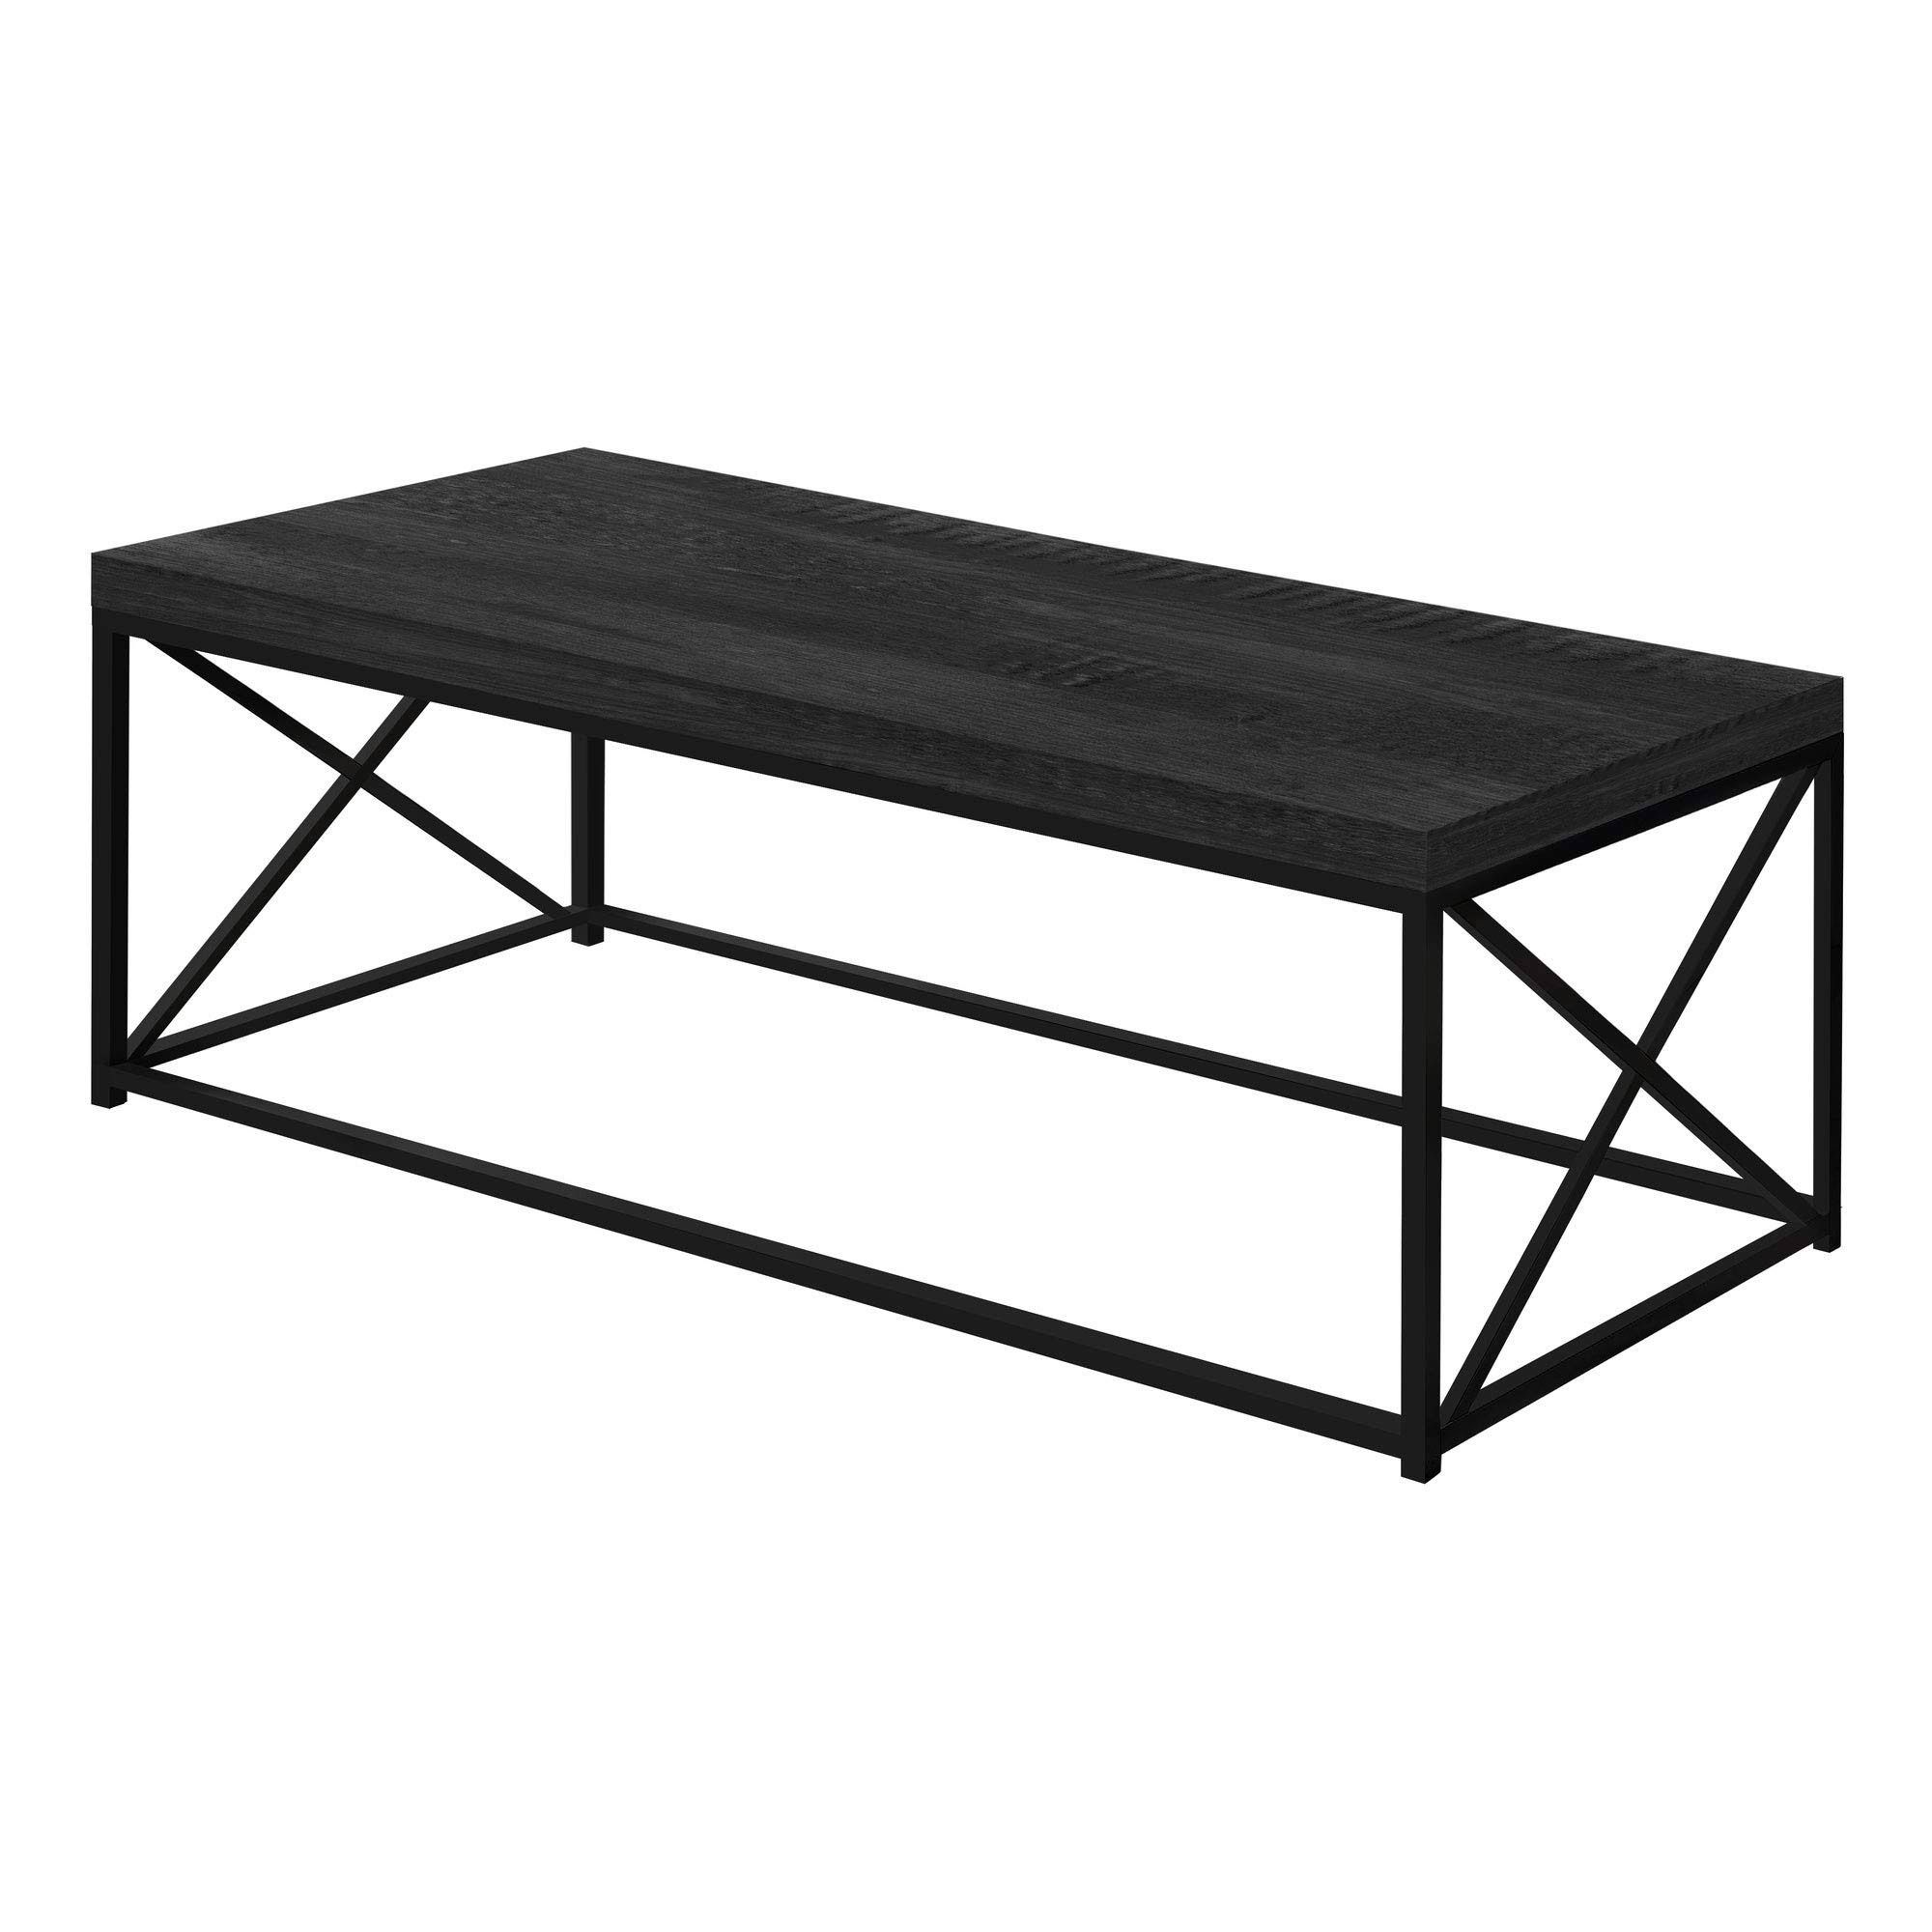 Studio 350 Black Metal Coffee Tables With Popular Monarch Black Wood Look Finish Black Metal Decor Contemporary Style (View 14 of 15)